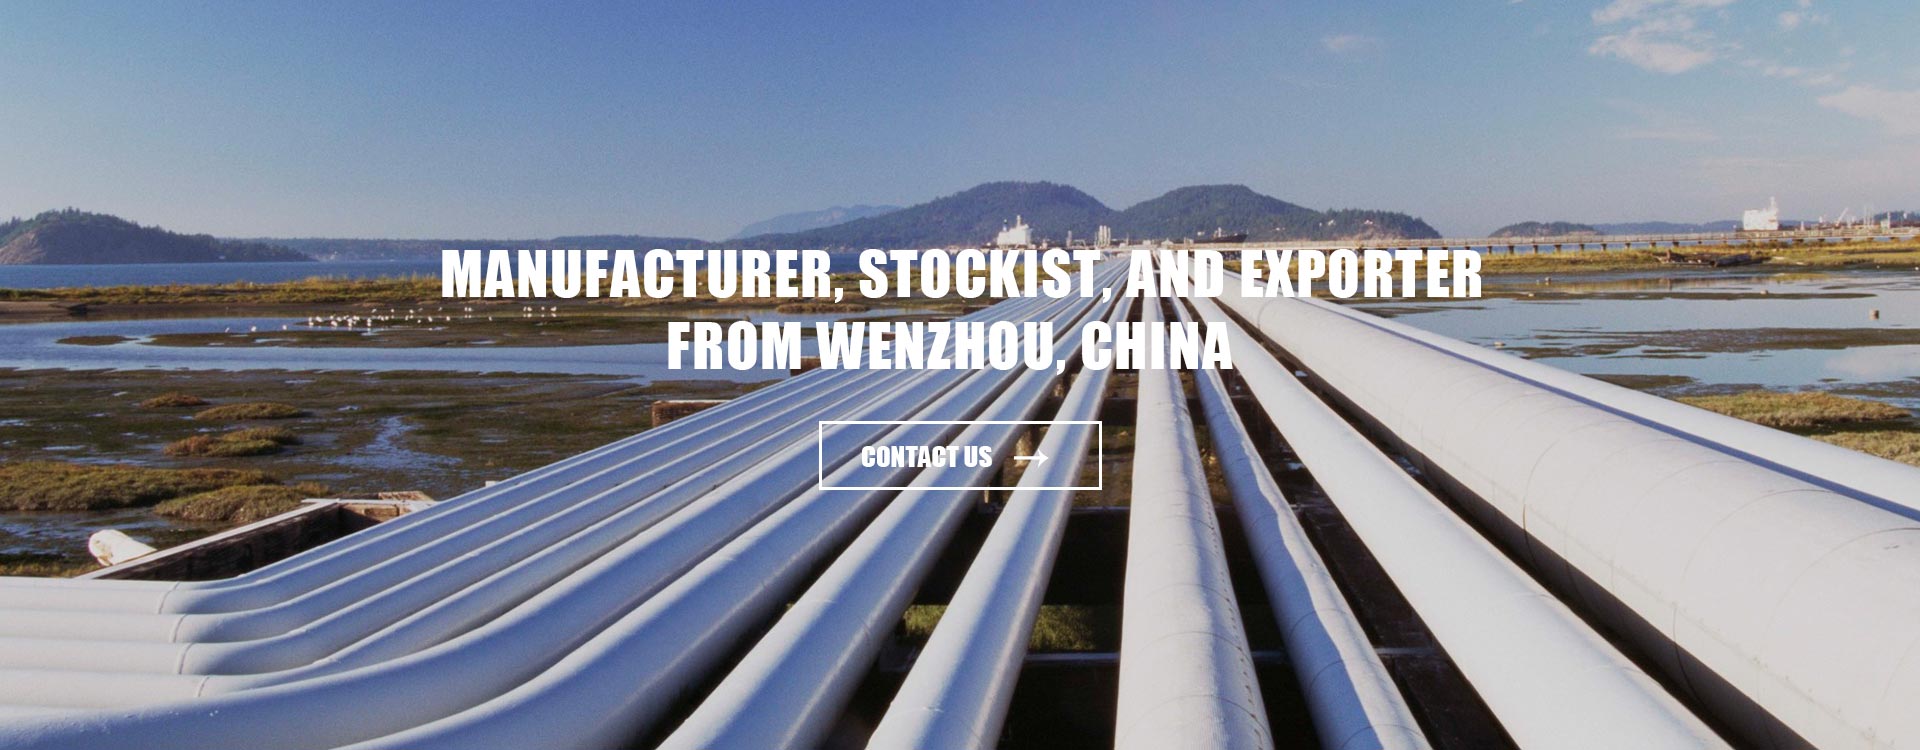 A312/A312 M Seamless Austenitic Stainless Steel Pipes